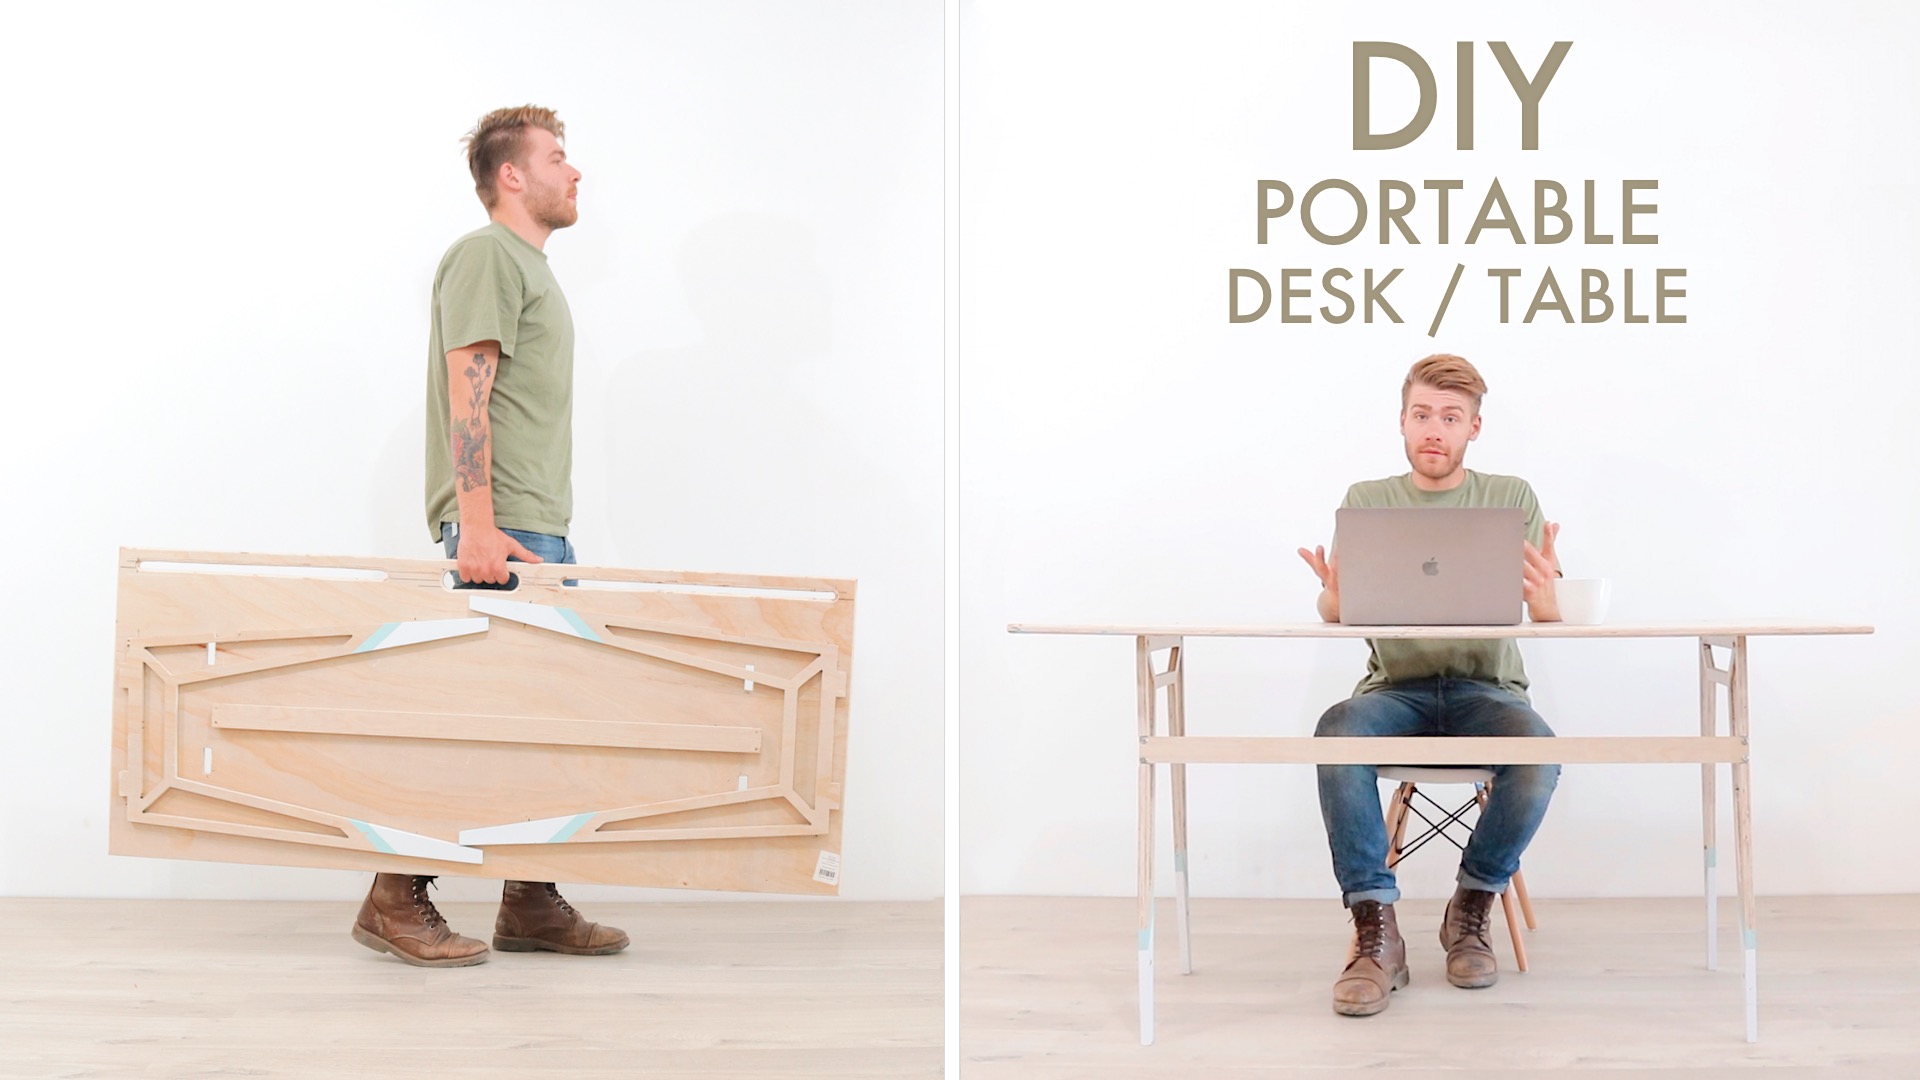  A portable, Fold Up Desk from a Single Sheet of 3/4” Plywood by: Mike Montgomery | Modern Builds 